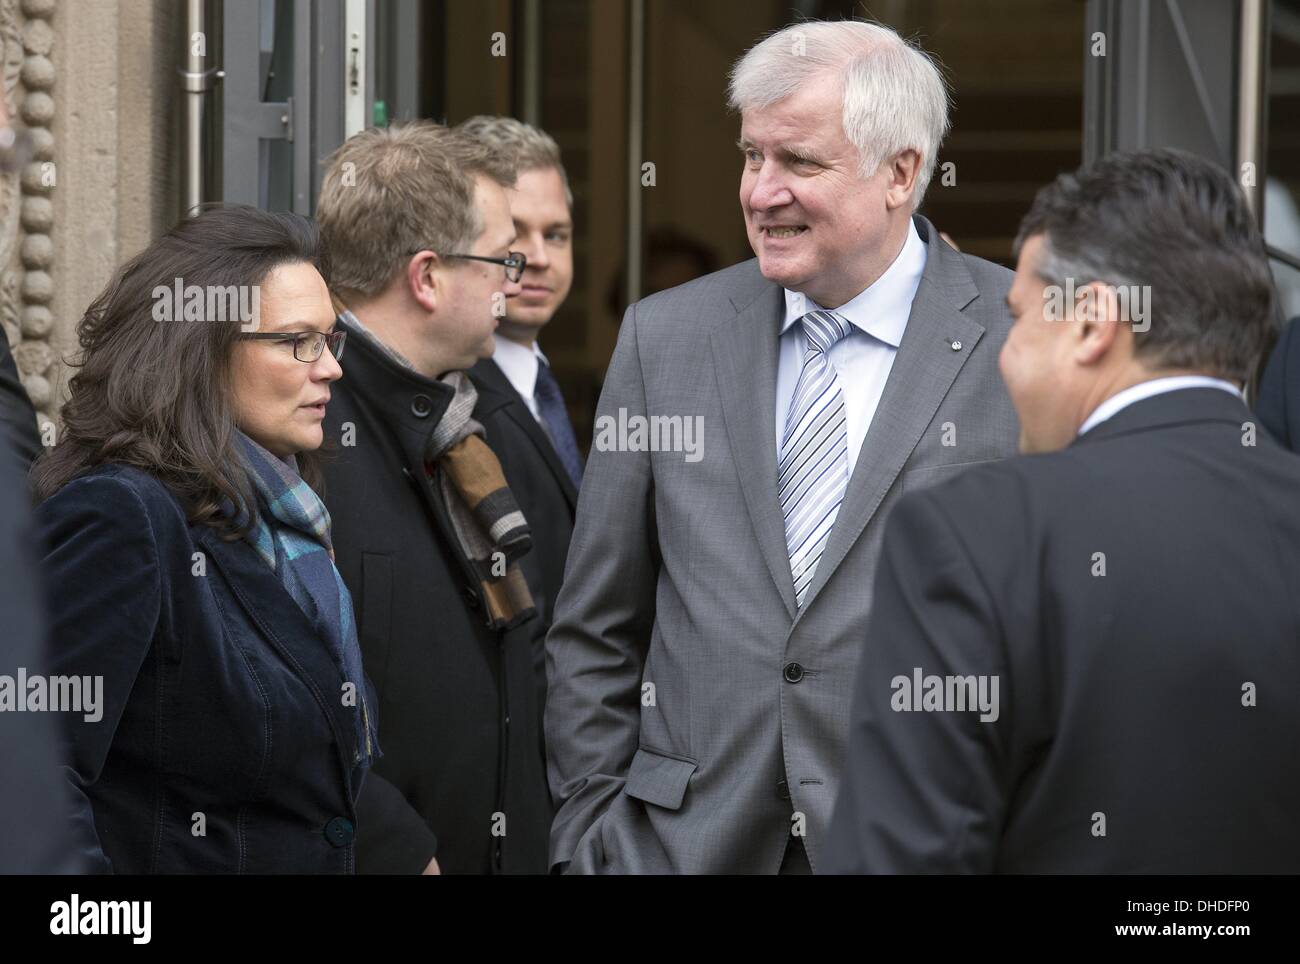 Berlin, Germany. 5th Nov, 2013. Horst Seehofer(CSU) receives in the house of Bavaria Representation in Berlin, Angela Merkel (CDU) and Sigmar Gabriel (SPD) for one more round of negotiations to the coalition between CDU / CSU and SPD, in Berlin, on November 5, 2013.Photo: Goncalo Silva/Nurphoto. © Goncalo Silva/NurPhoto/ZUMAPRESS.com/Alamy Live News Stock Photo